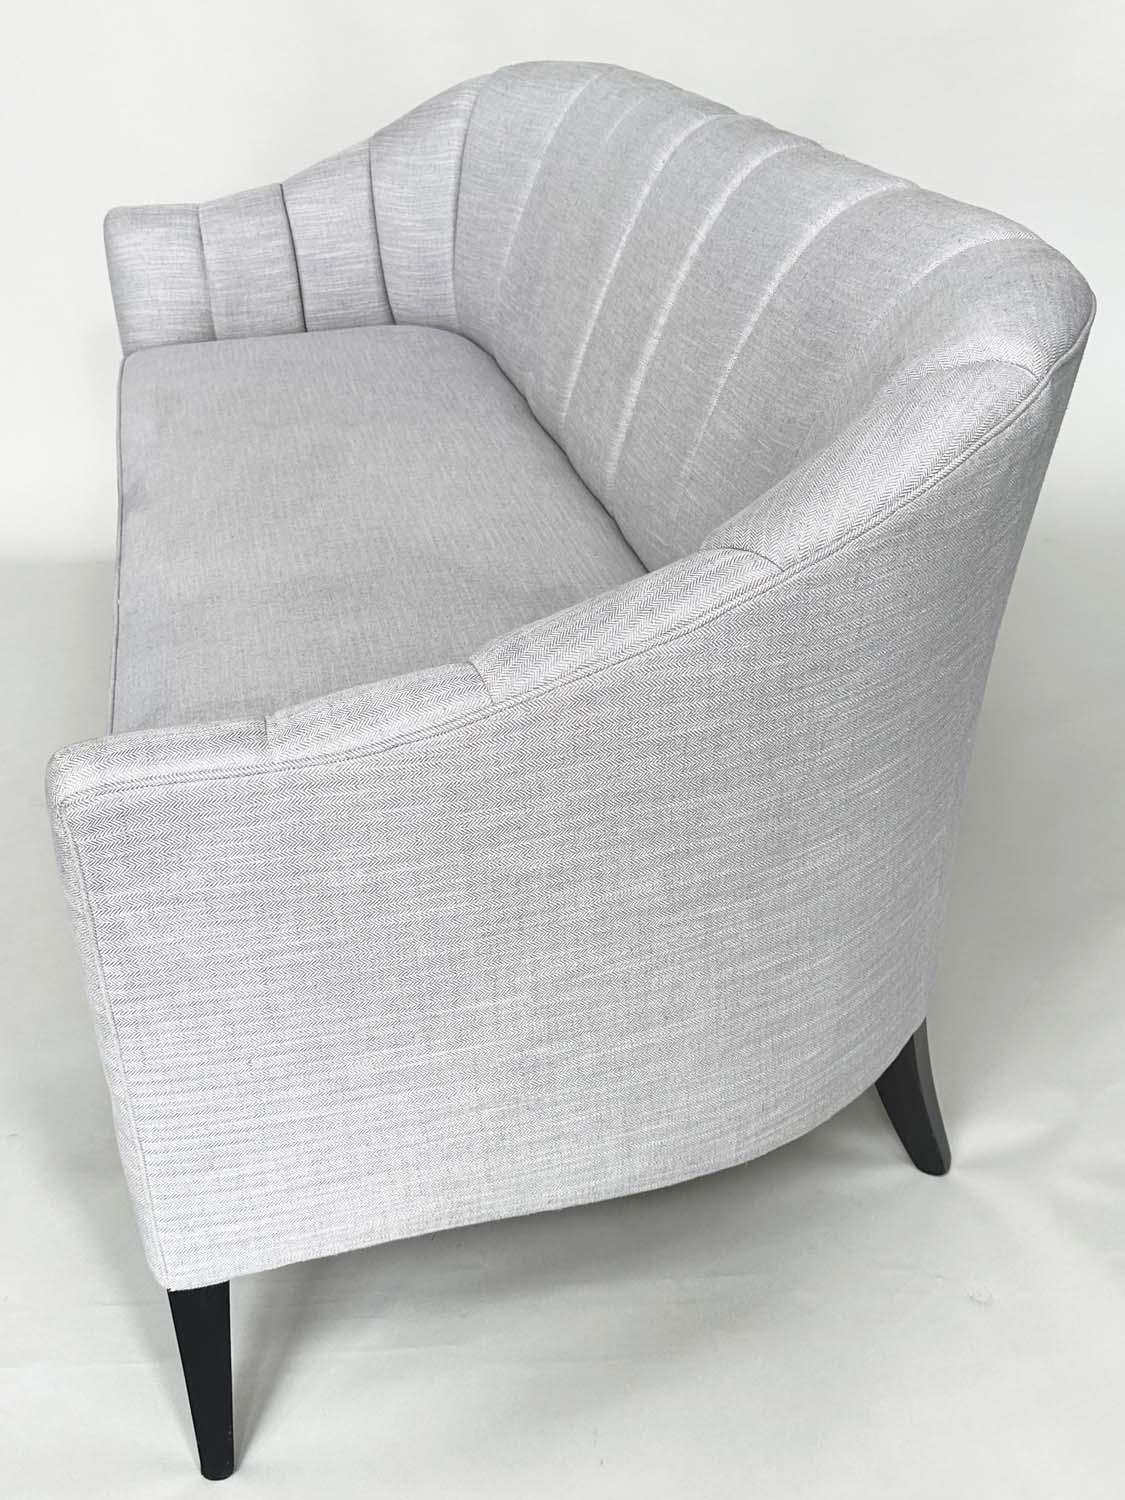 BRAY DESIGN SOFA, ribbed curved back and out swept supports, in Sahco Flint fabric upholstery, 210cm - Image 10 of 11